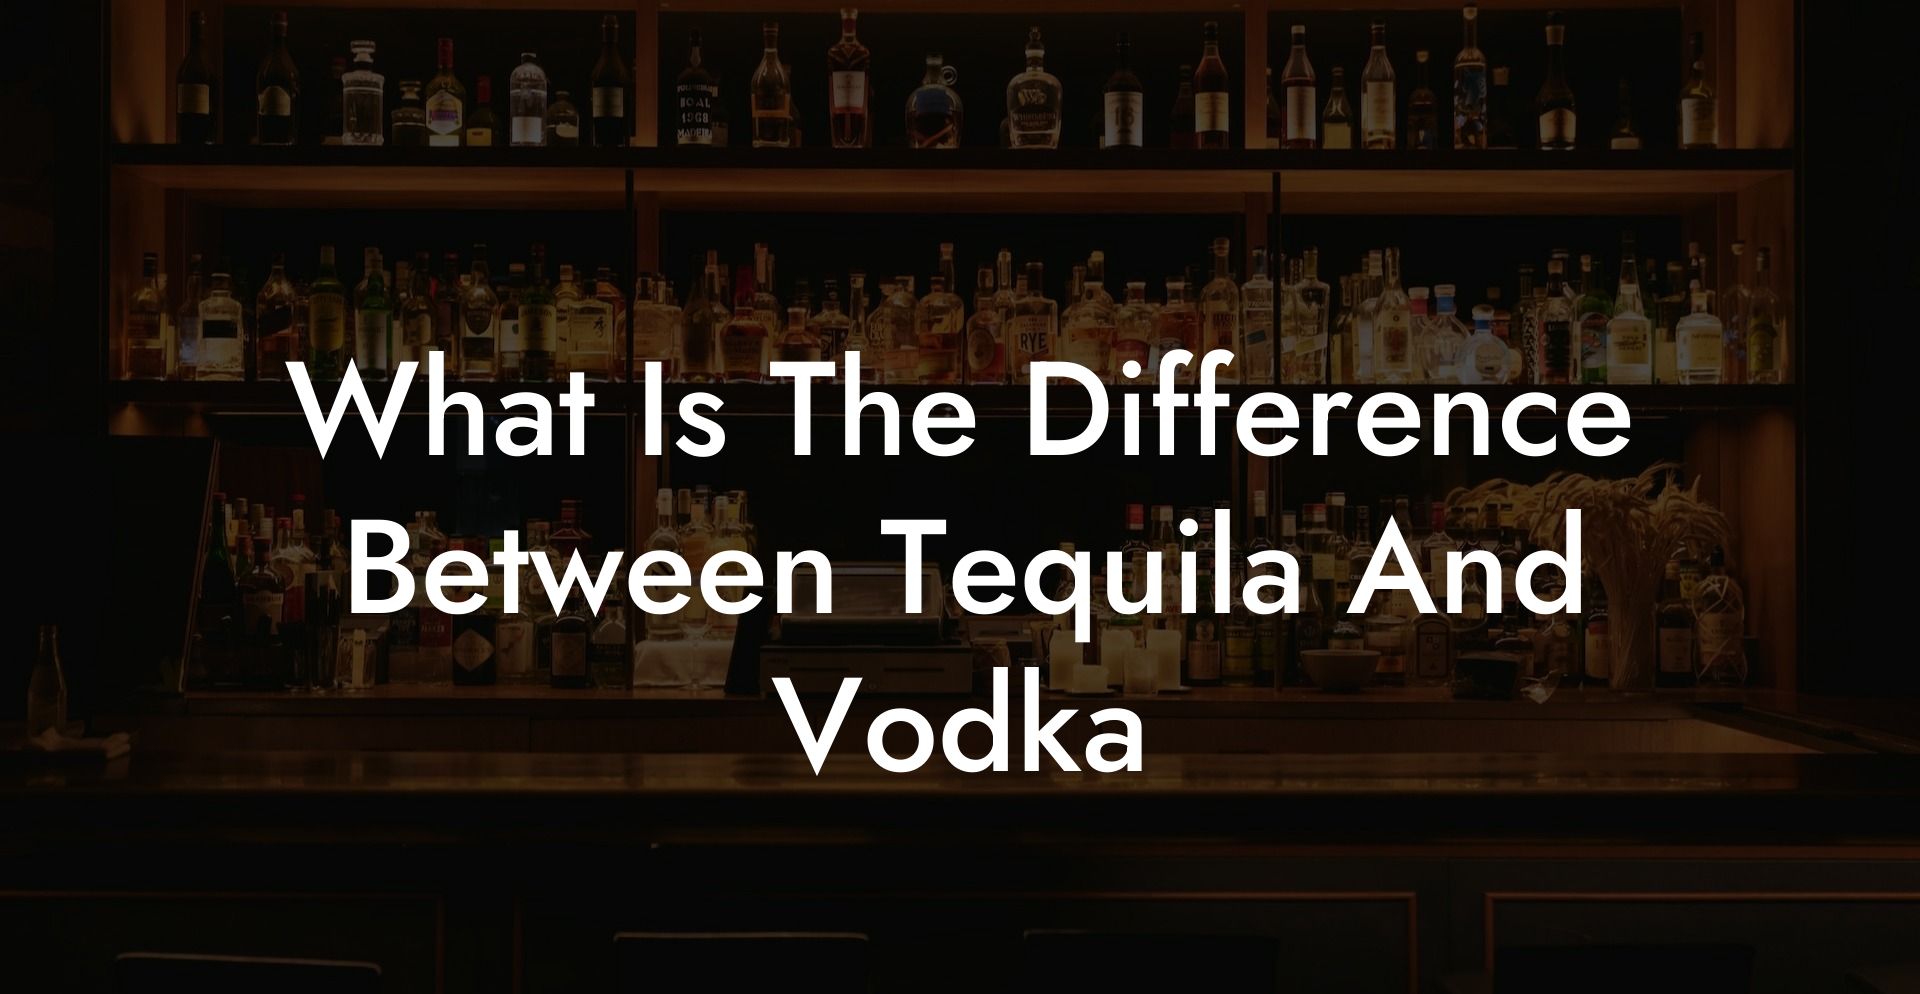 What Is The Difference Between Tequila And Vodka